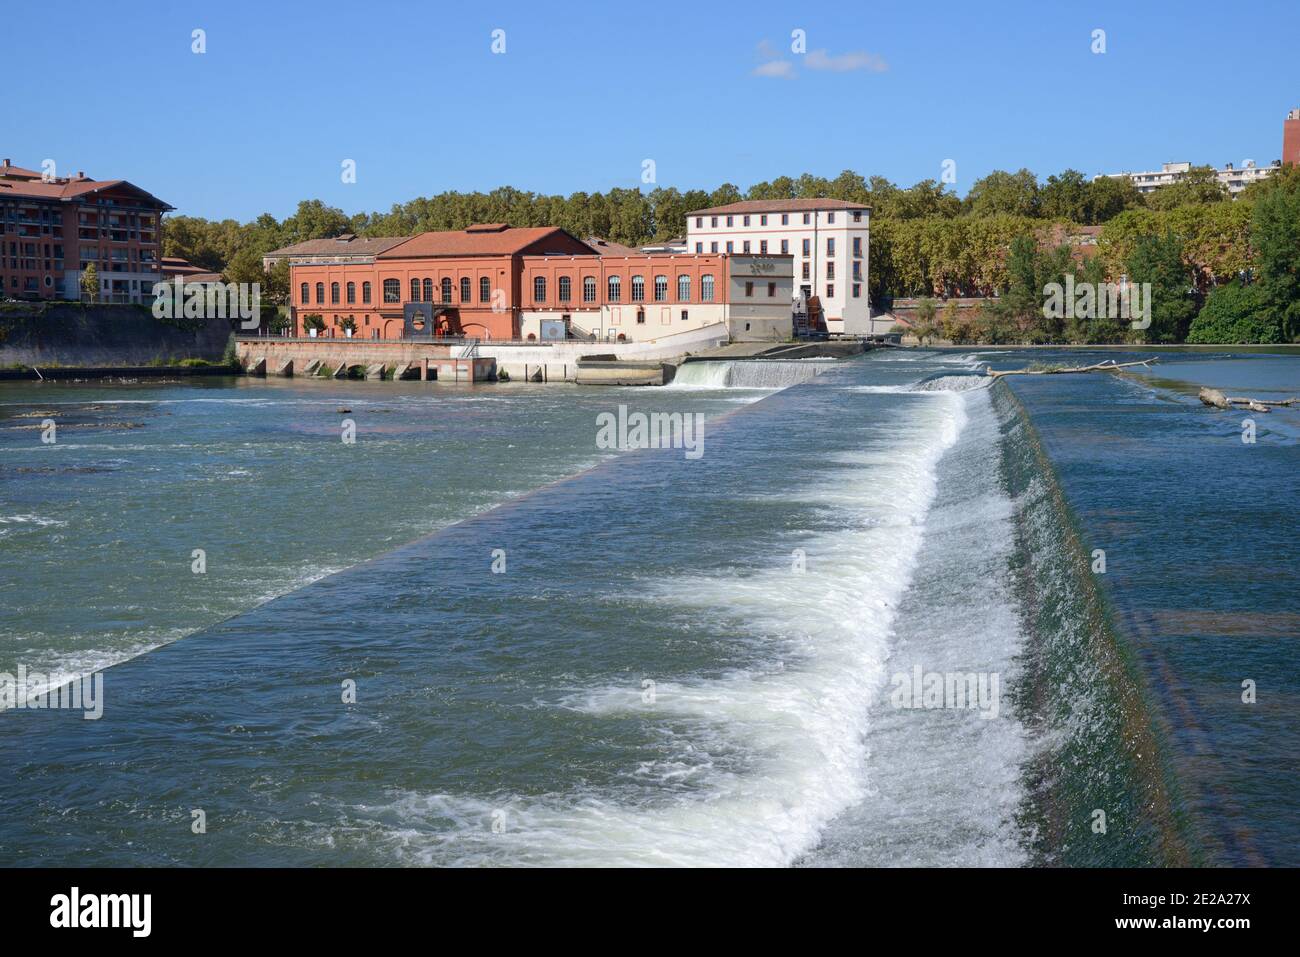 Bazacle Hydro-Electric Barrage, Weir or Dam on the Garonne River Toulouse France Stock Photo